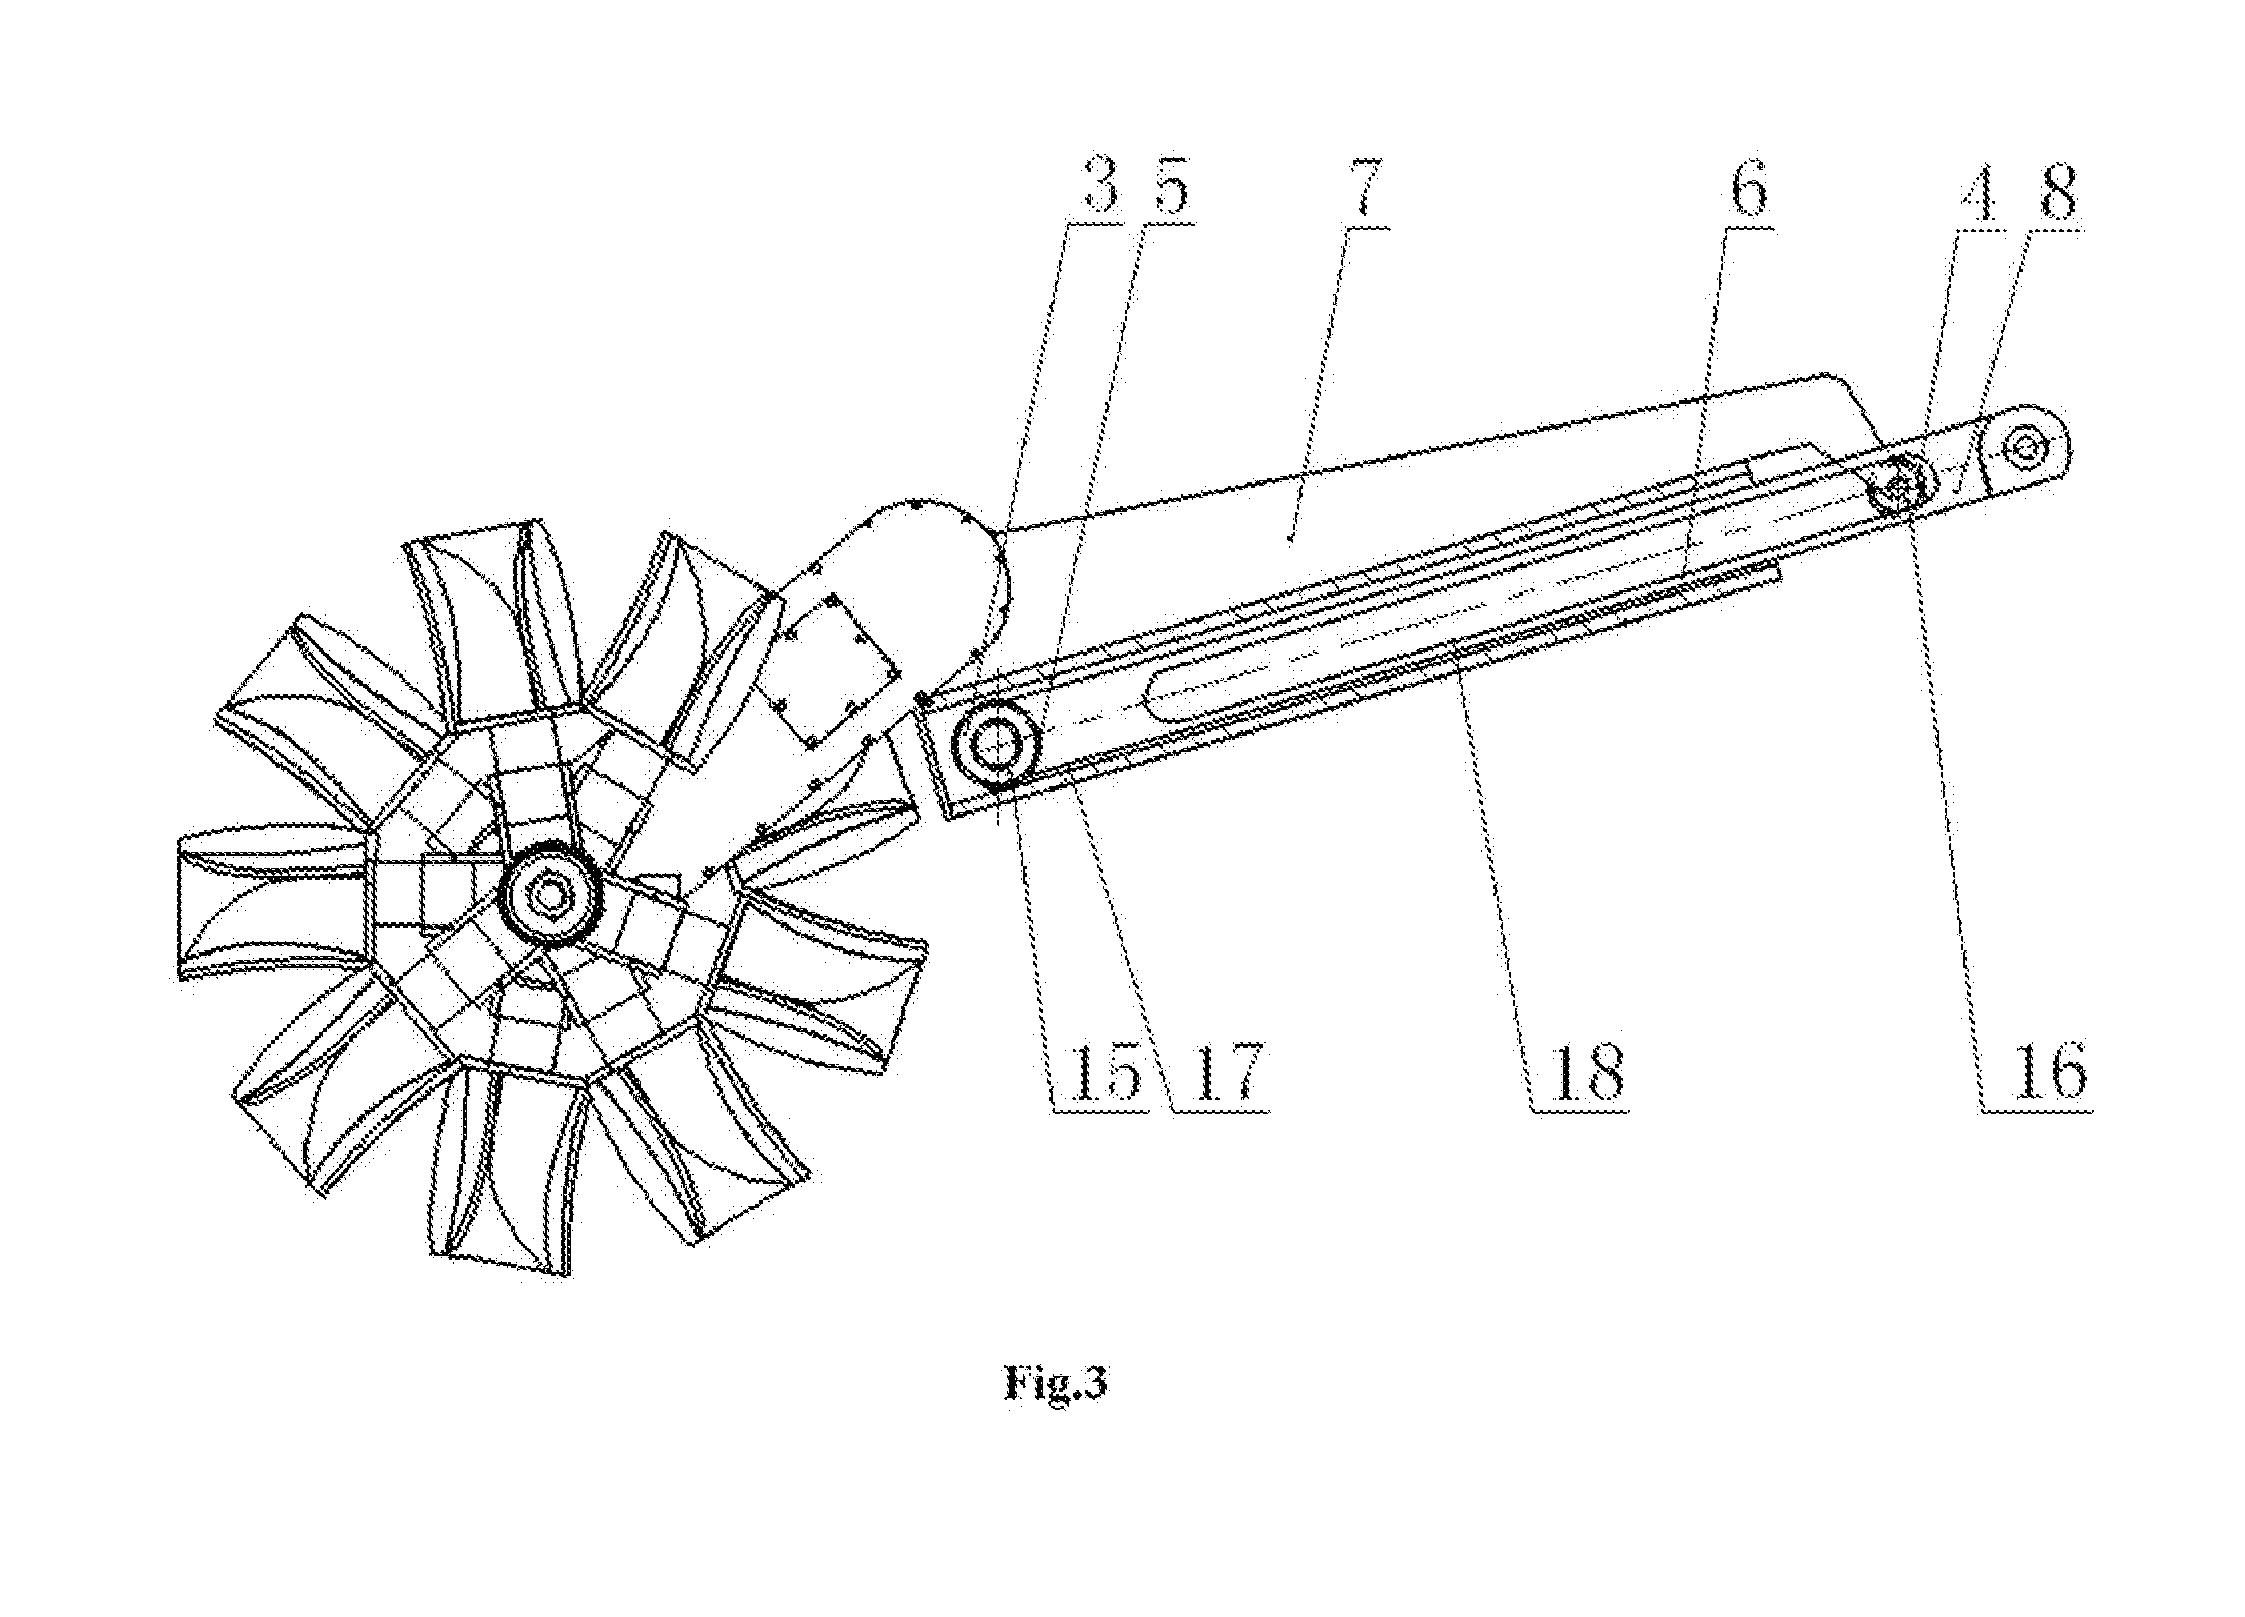 Method for arranging rolling-friction stretching and retraction based rolling stroke sections of a rocker arm in parallel, and an excavator or loader comprising a rocker arm having rolling stroke sections arranged in parallel